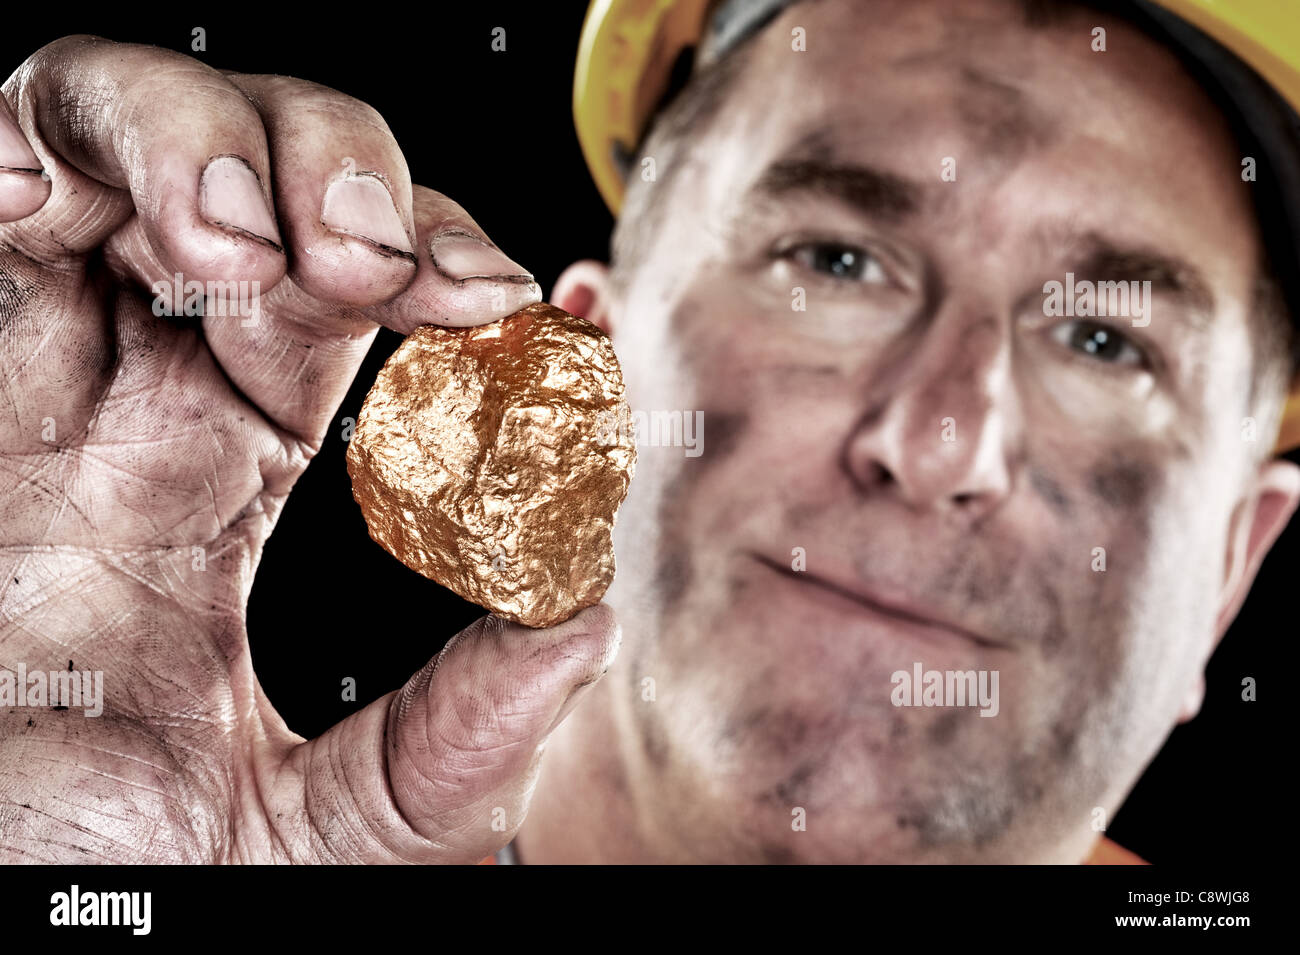 A gold miner shows a golden nugget freshly excavated from a mine. Stock Photo